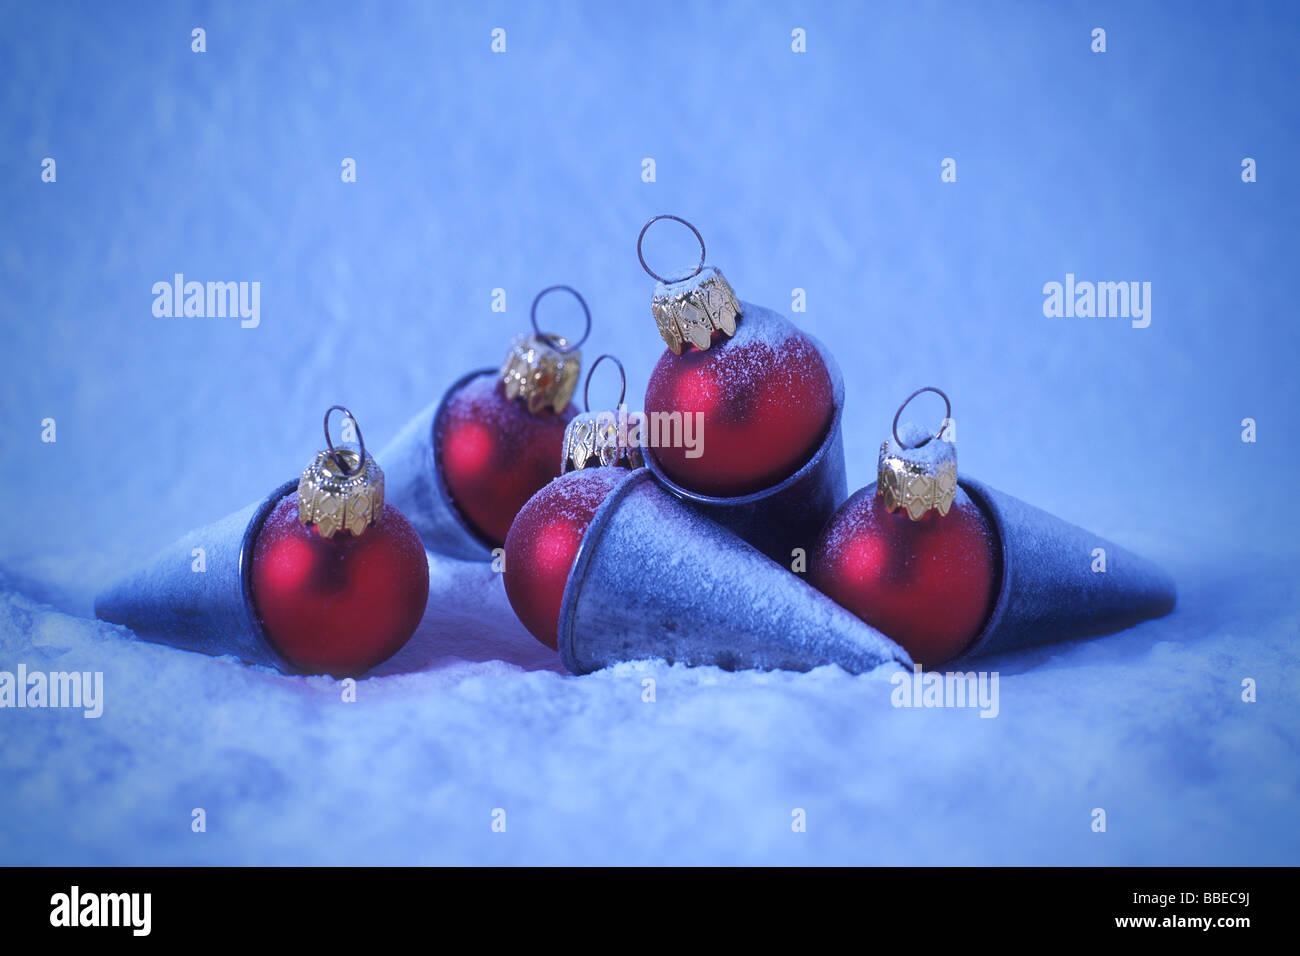 Red Christmas Ornaments Inside Antique Pastry Decorating Tips Stock Photo